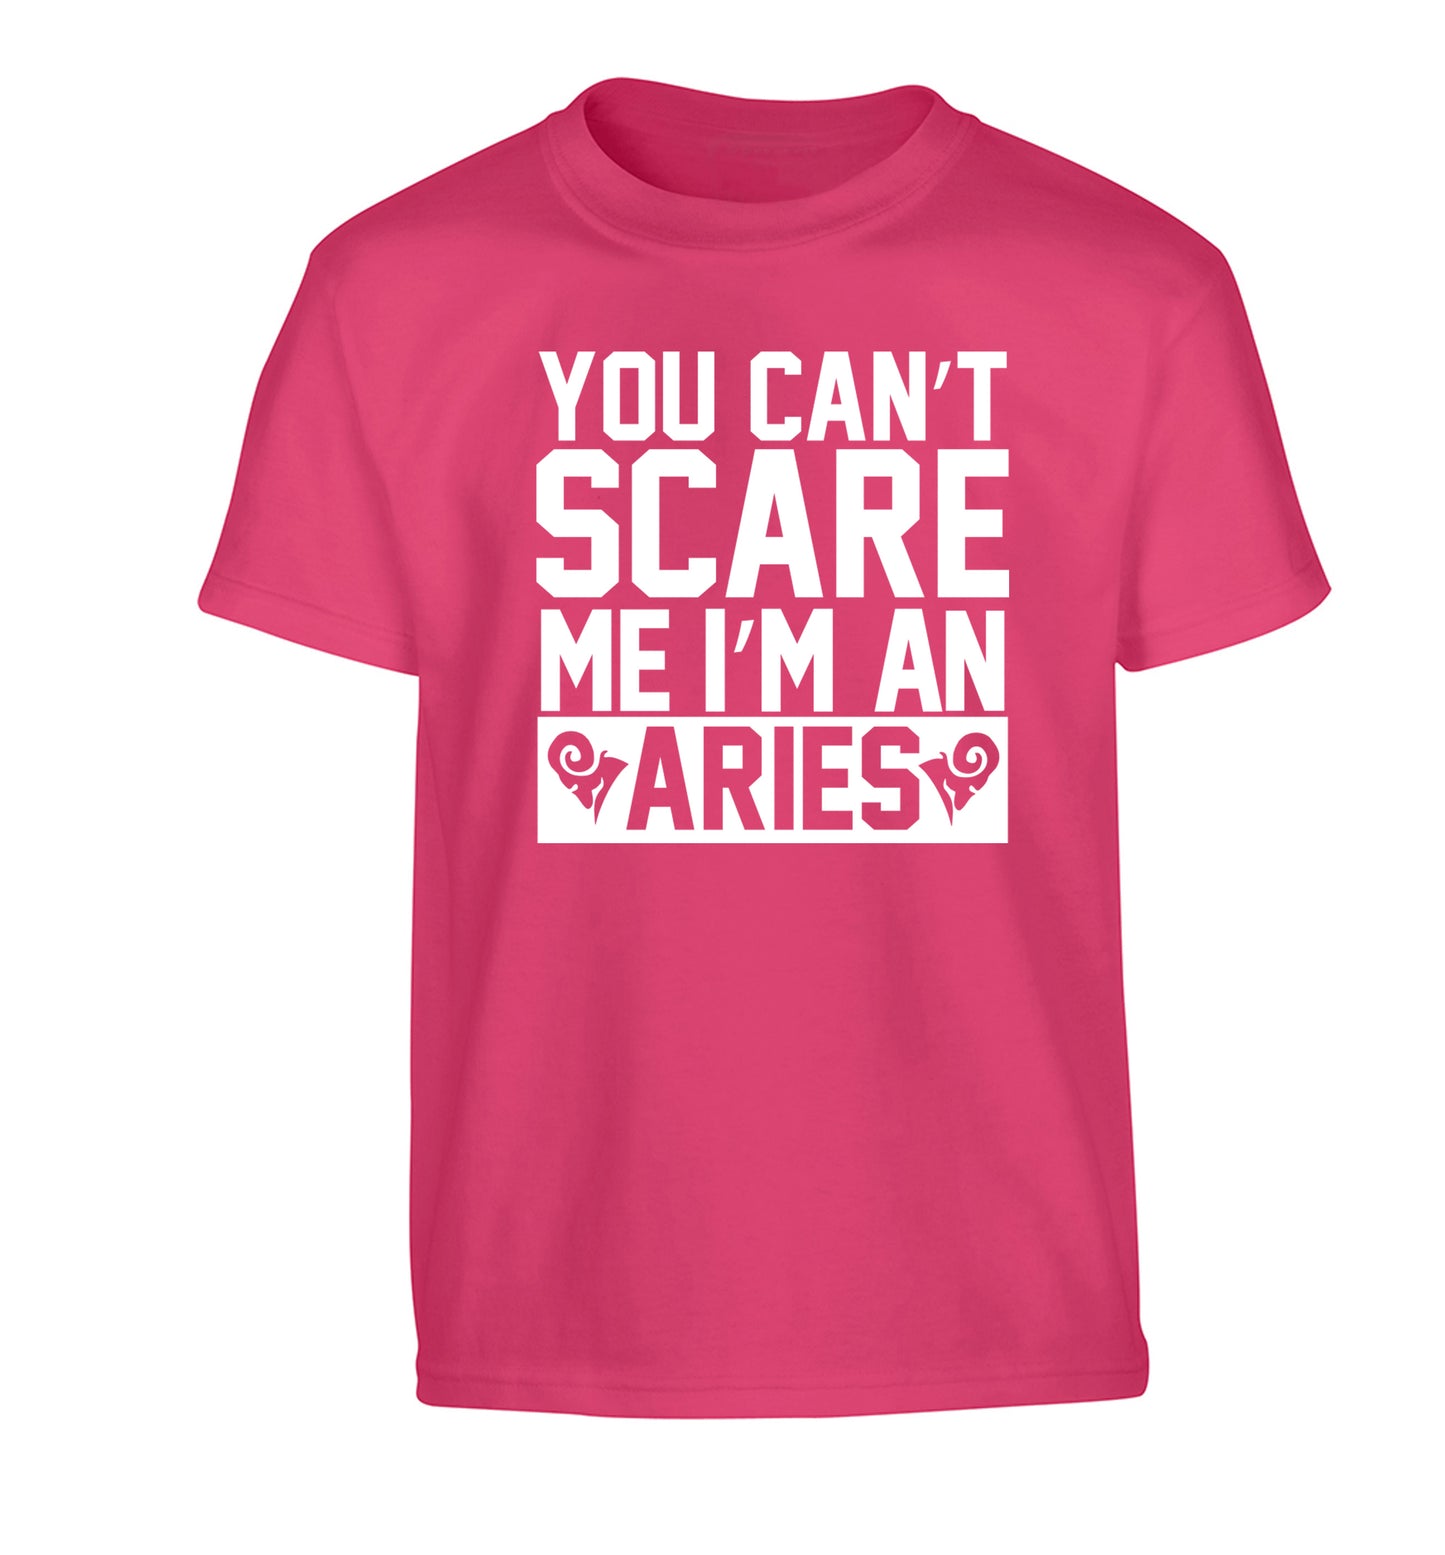 You can't scare me I'm an aries Children's pink Tshirt 12-13 Years